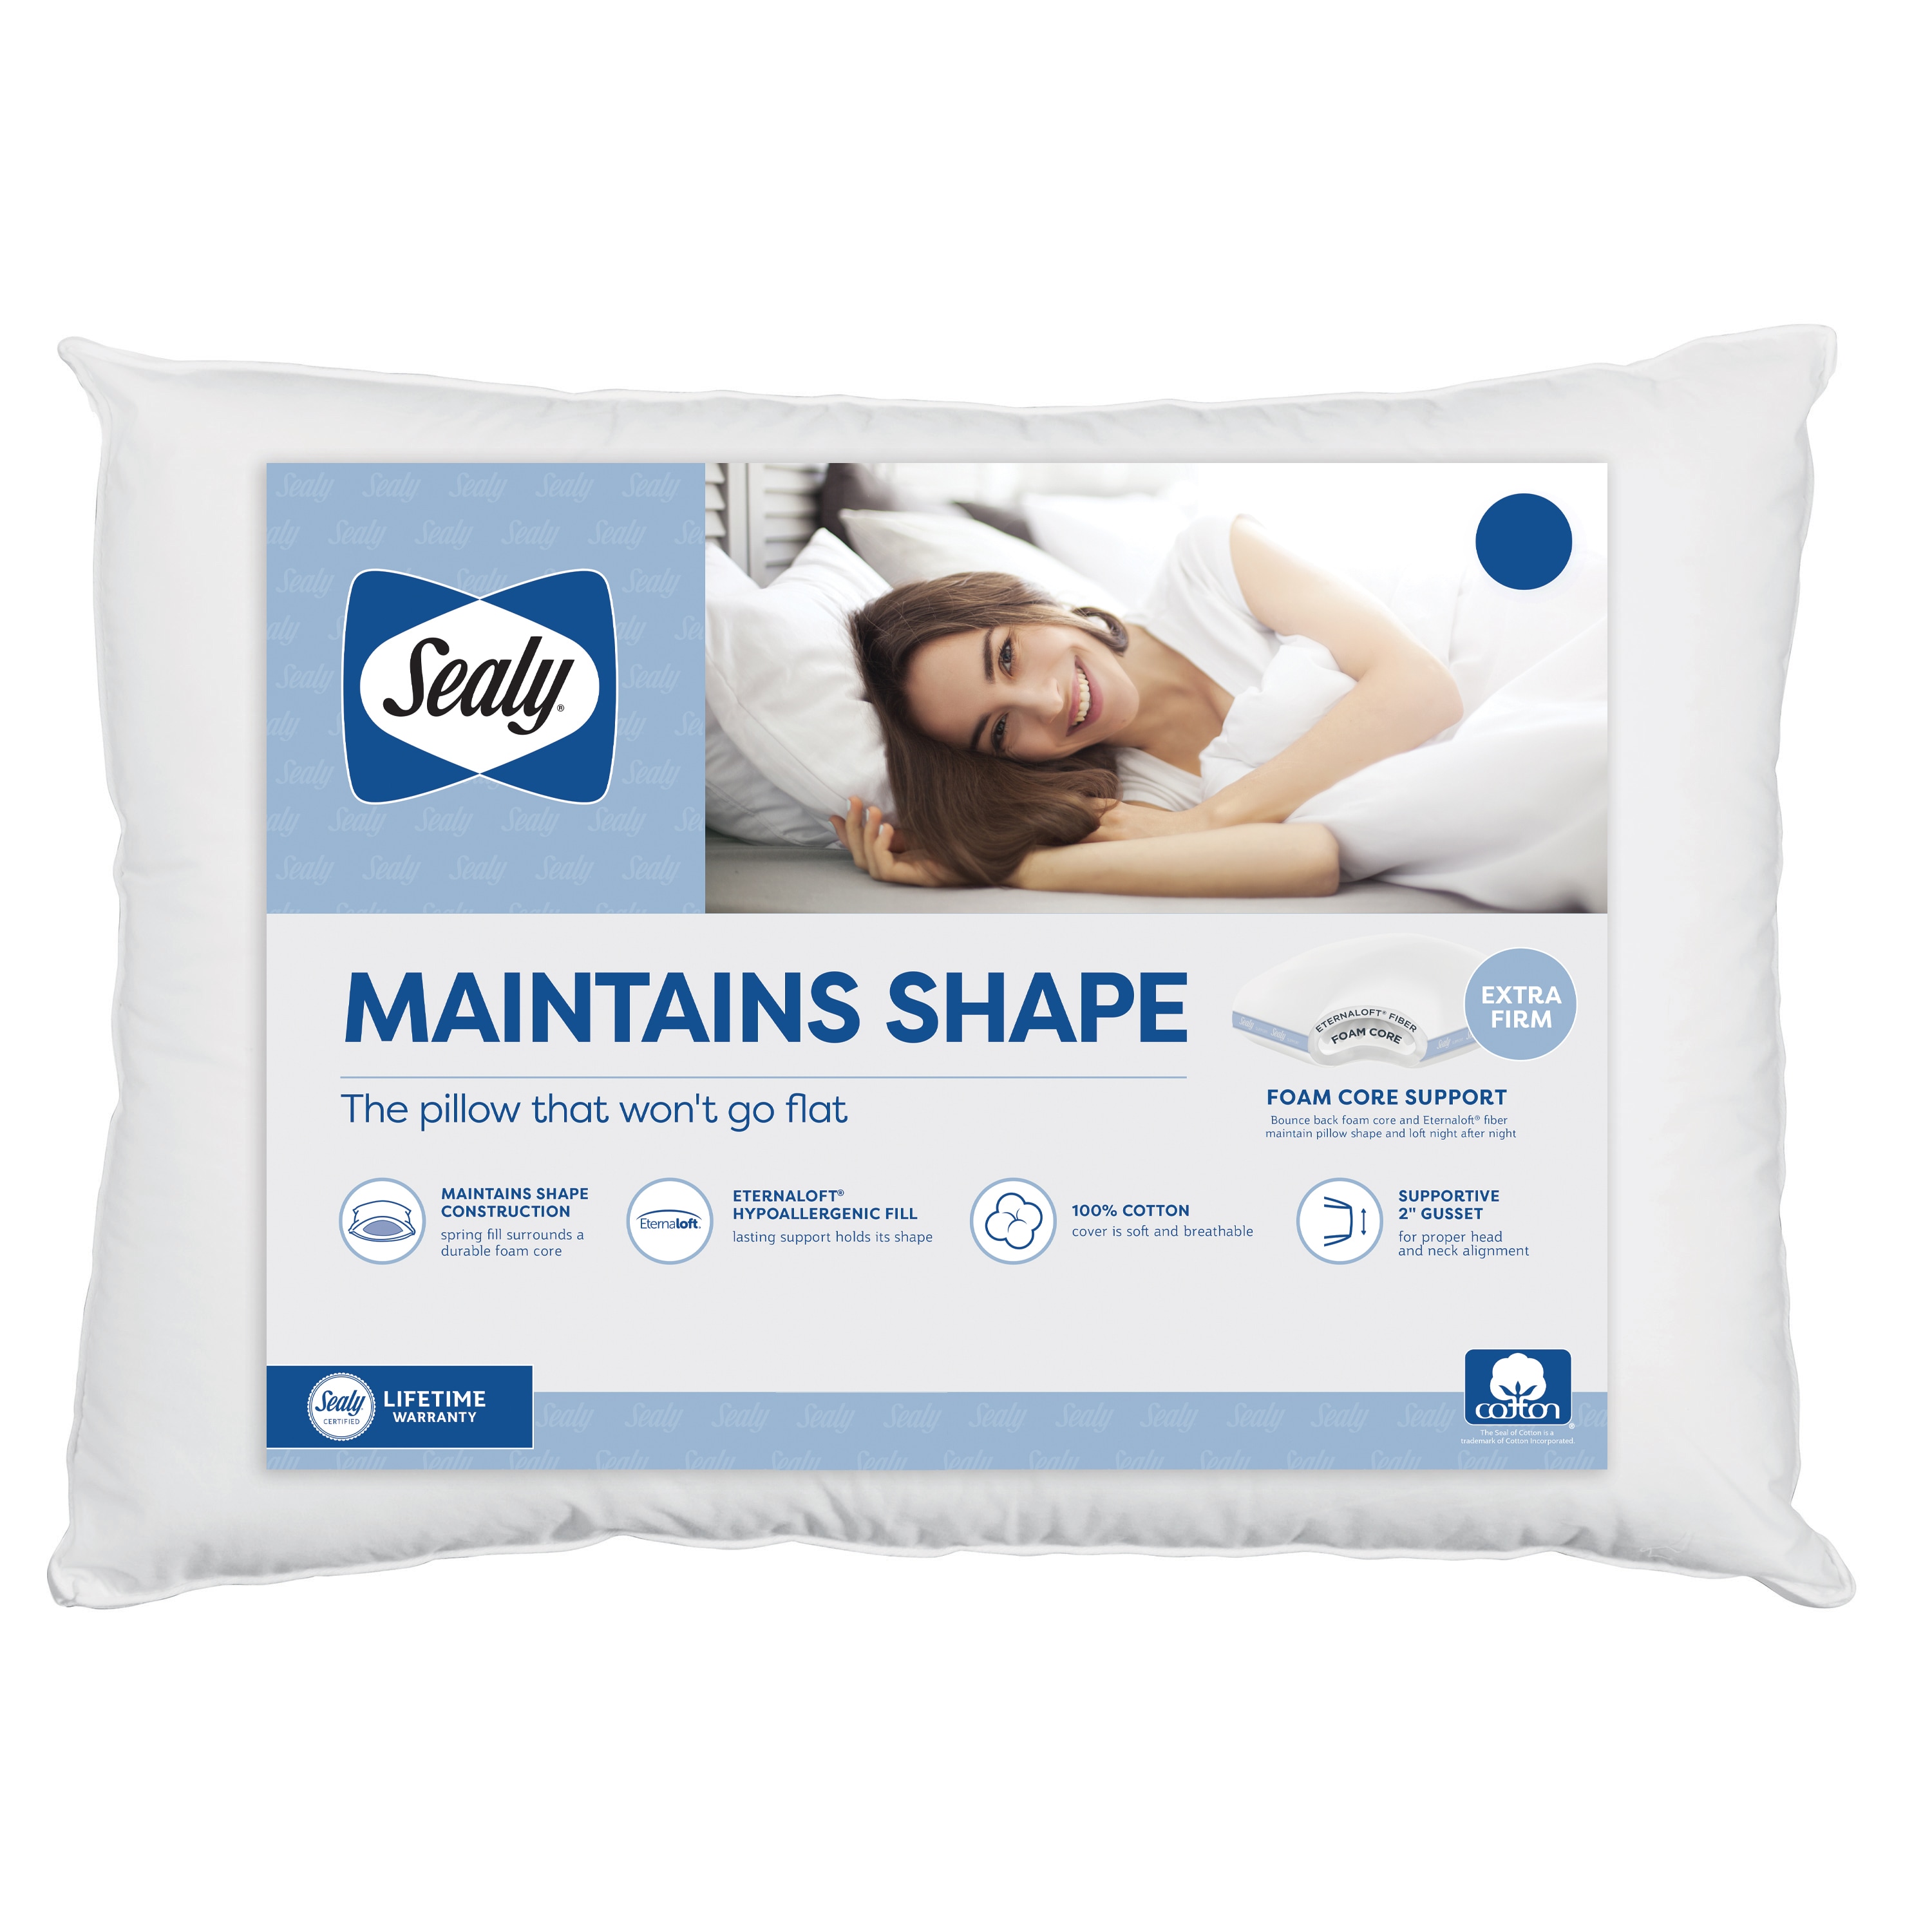 Sealy Extra-Firm Pillow - White, Standard - Kroger